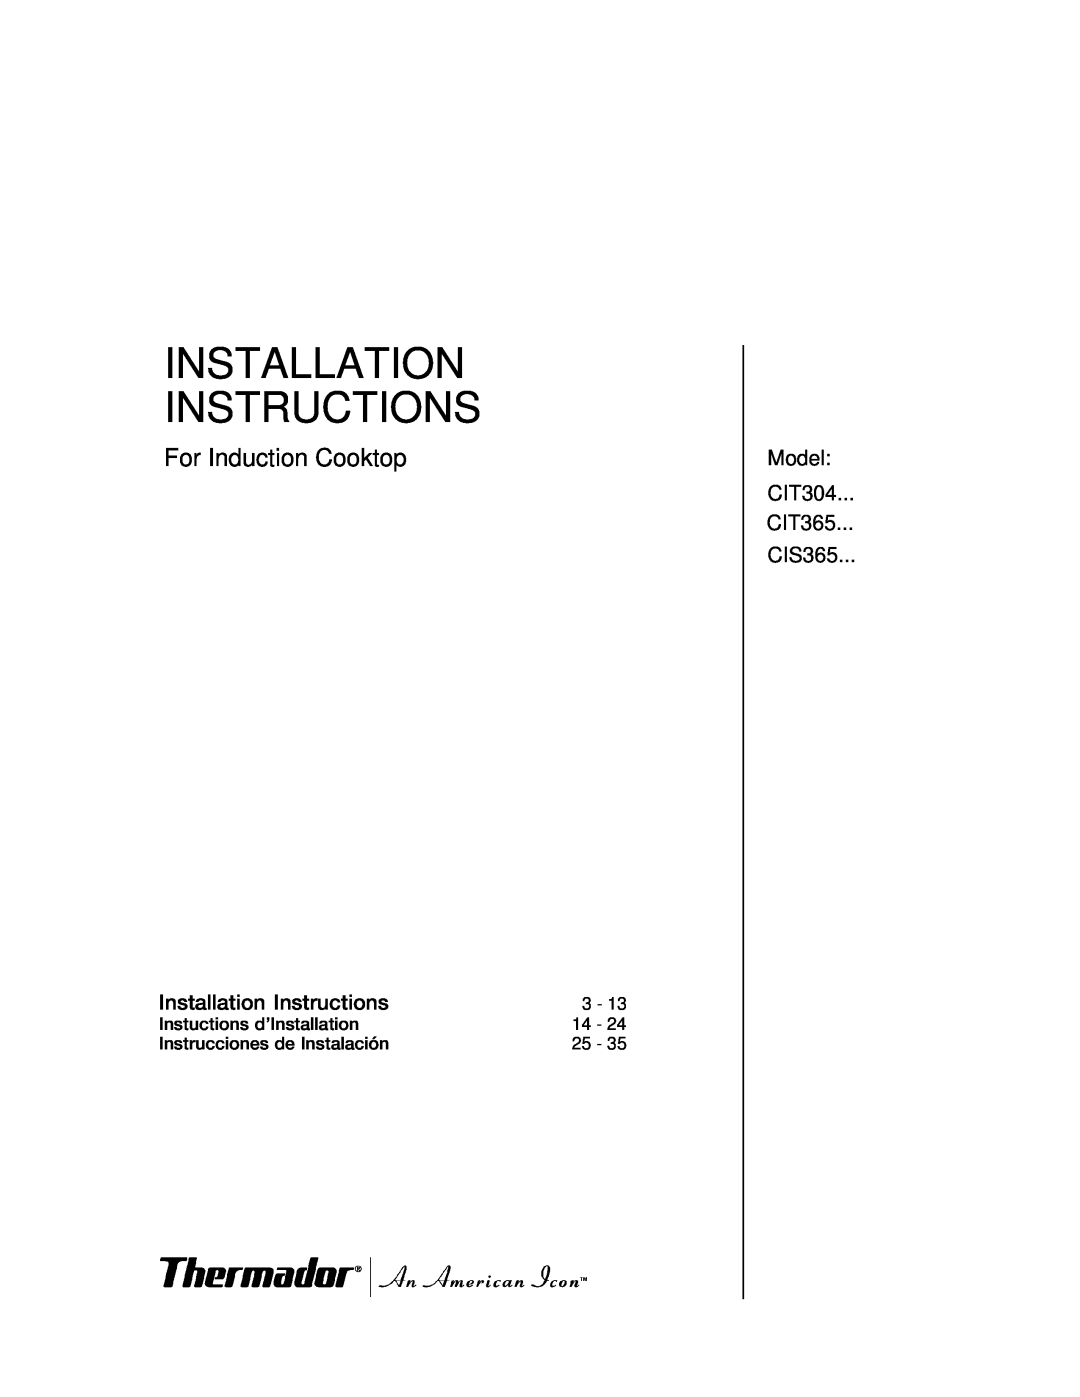 Thermador installation instructions Installation Instructions, For Induction Cooktop, Model CIT304 CIT365 CIS365, I Iaa 